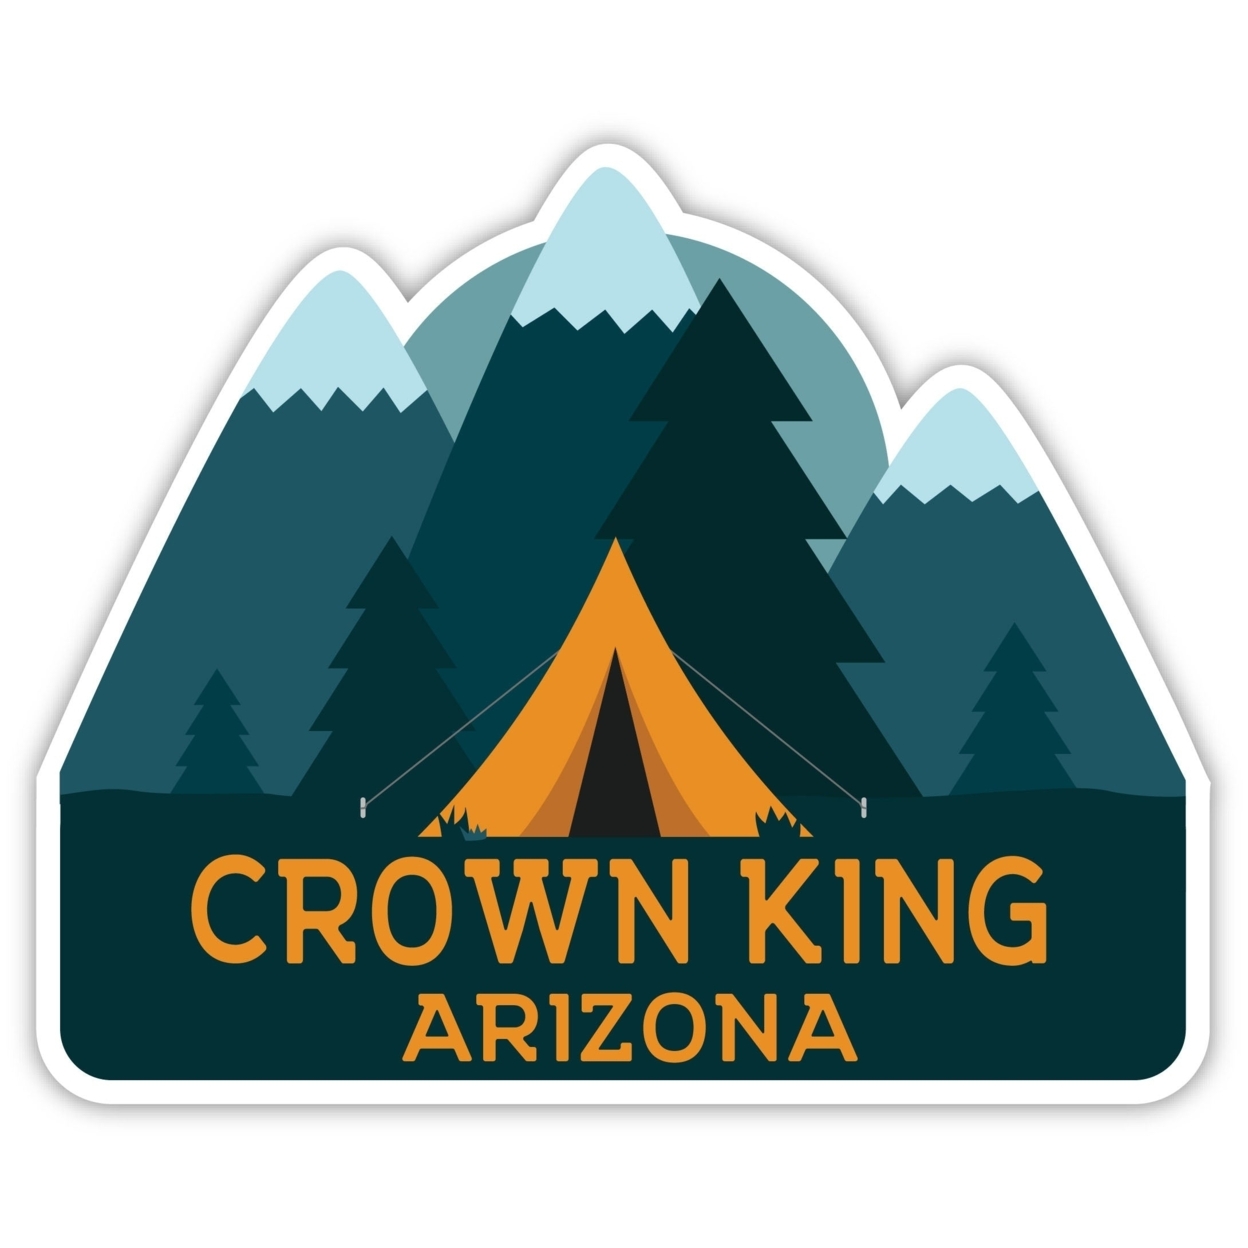 Crown King Arizona Souvenir Decorative Stickers (Choose Theme And Size) - 4-Pack, 10-Inch, Tent